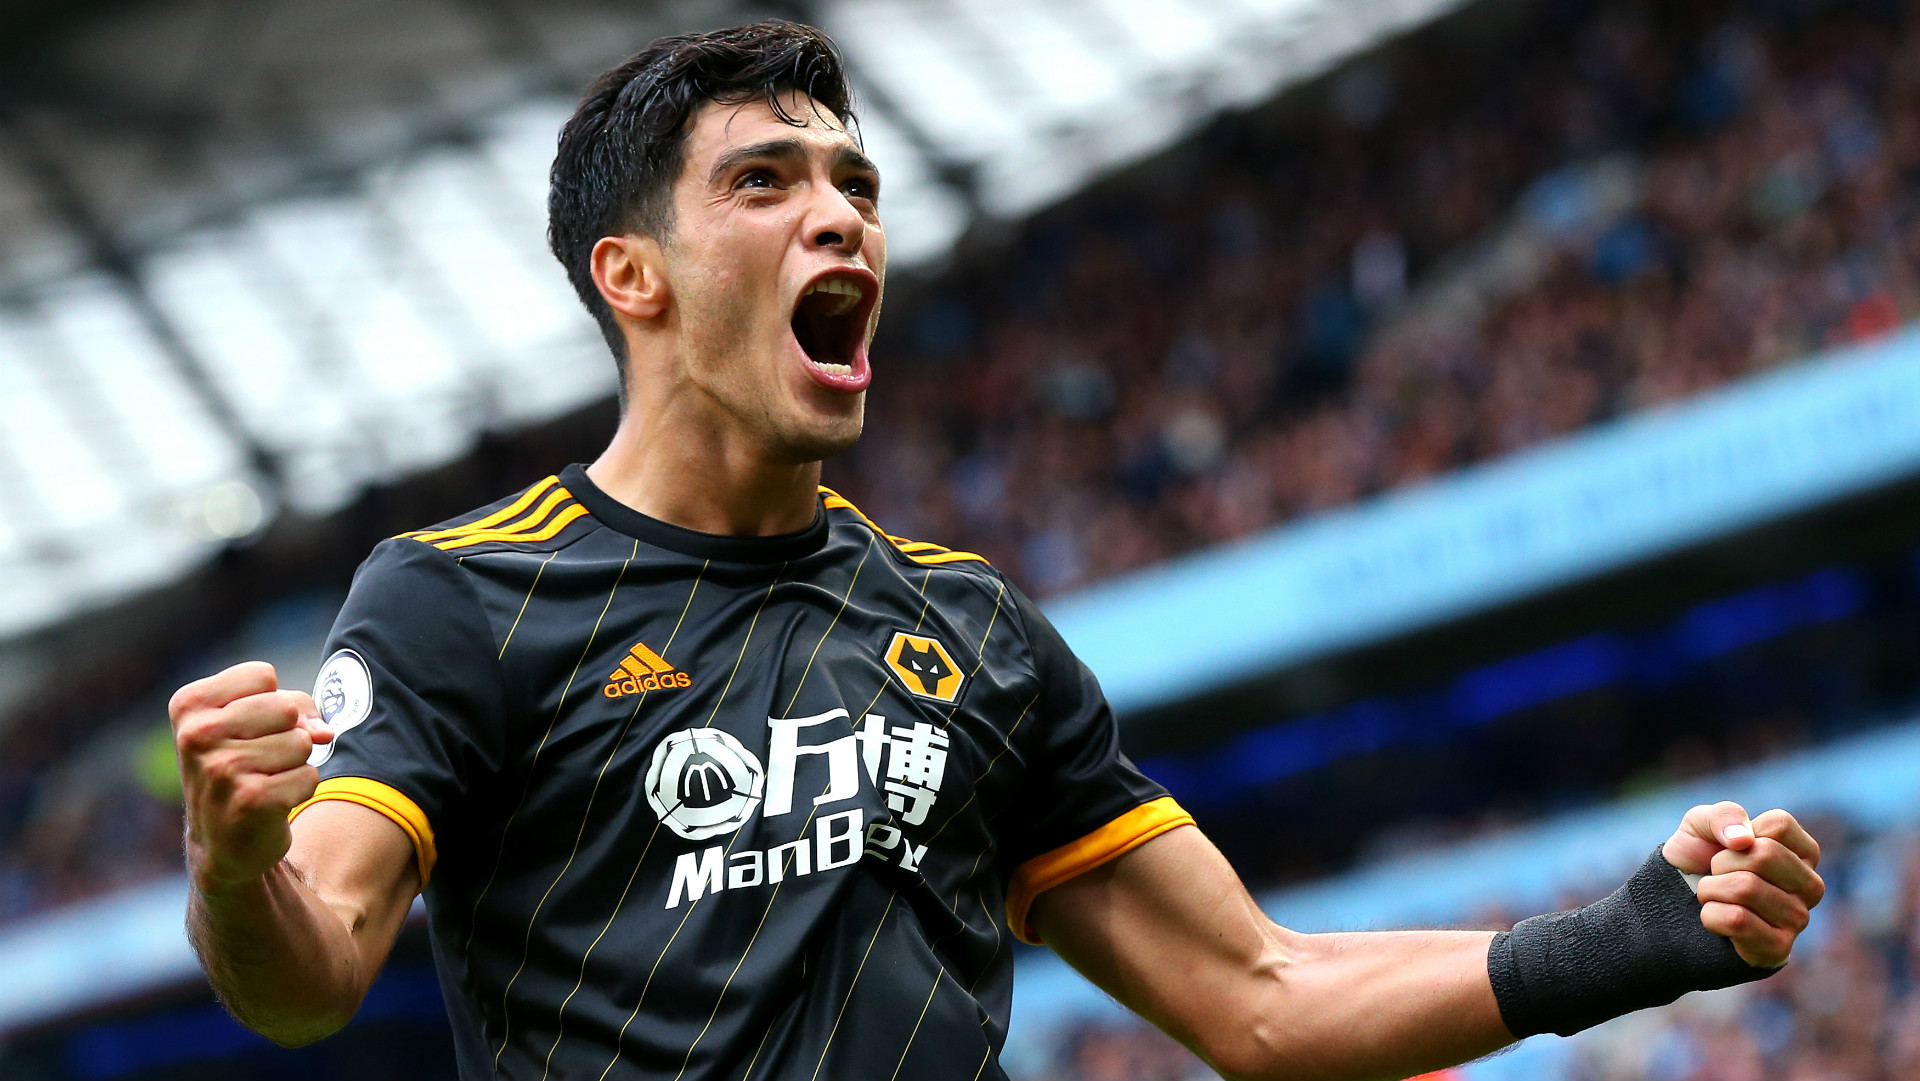 Real Madrid have been linked but Raul Jimenez can win silverware at Wolves - Bull